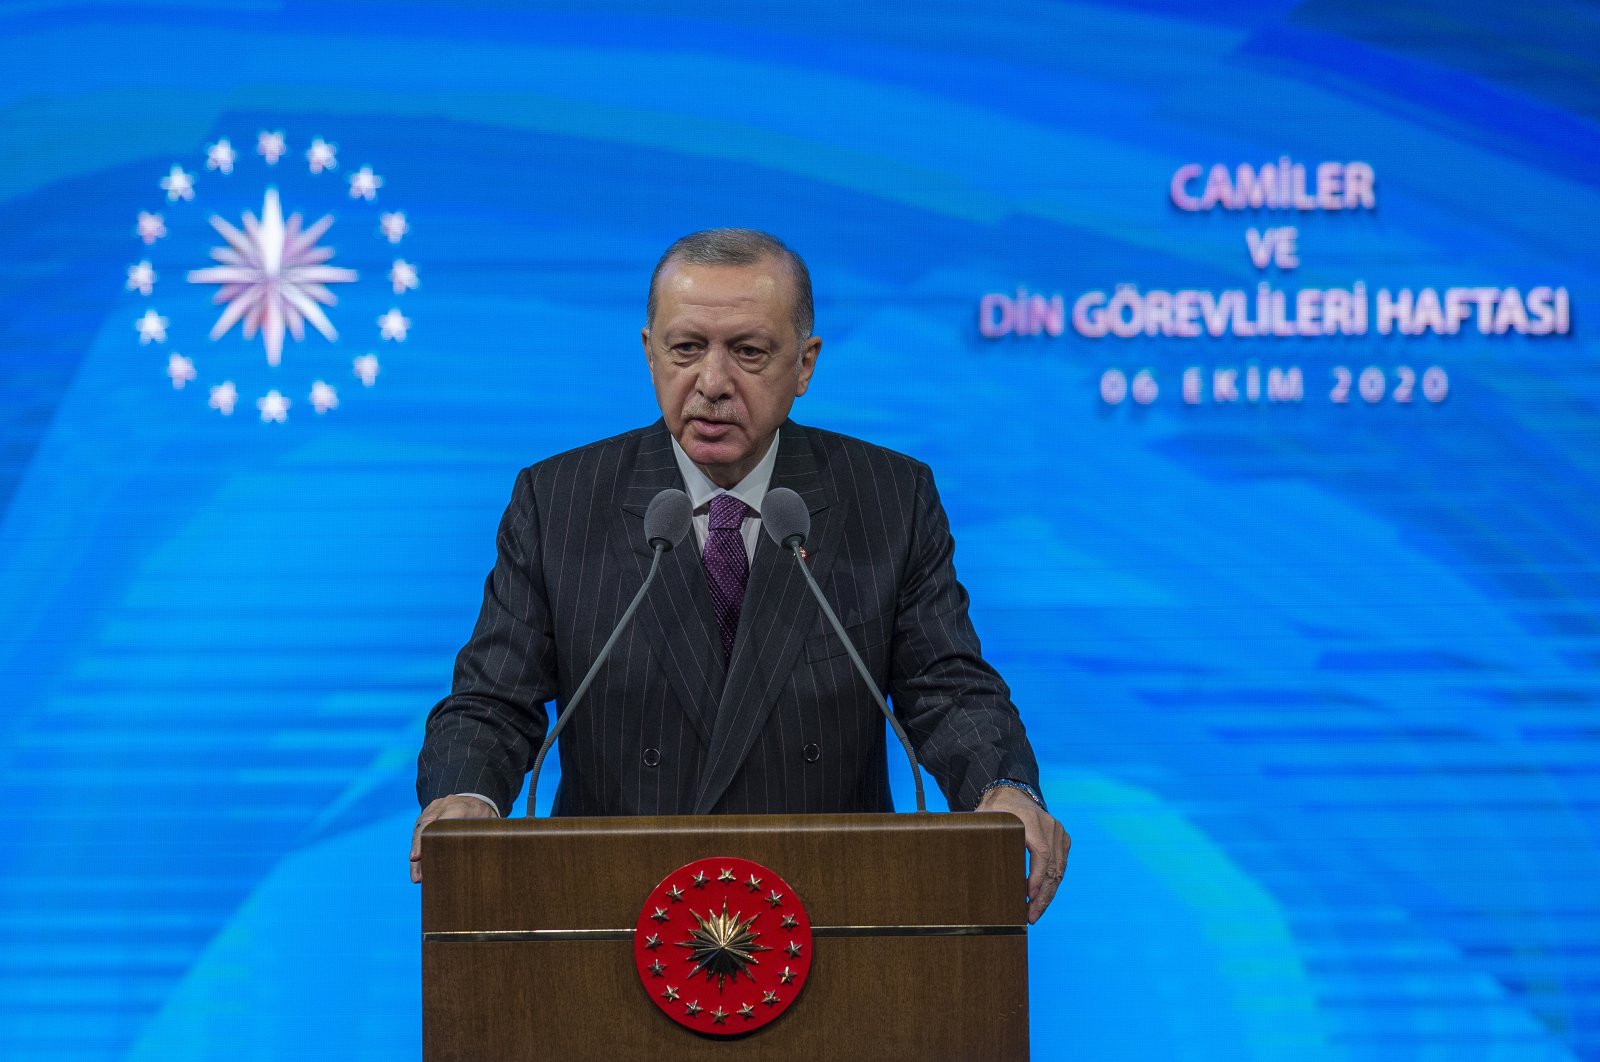 President Recep Tayyip Erdoğan speaks at the Beştepe National Congress and Cultural Center in Ankara on Oct. 6, 2020. (AA Photo)